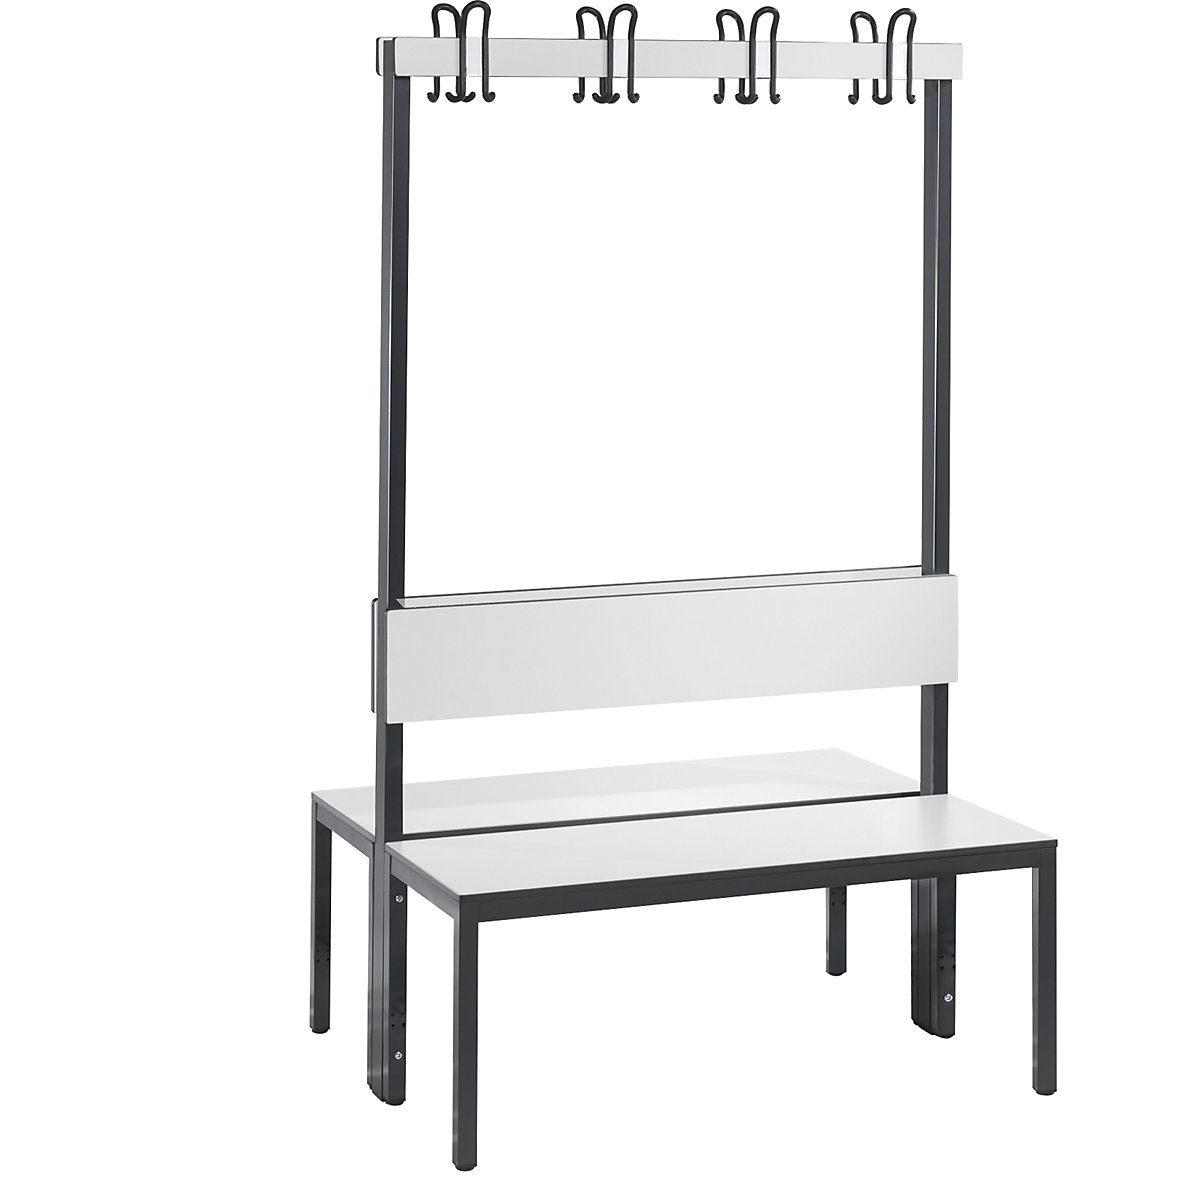 BASIC PLUS cloakroom bench, double sided - C+P